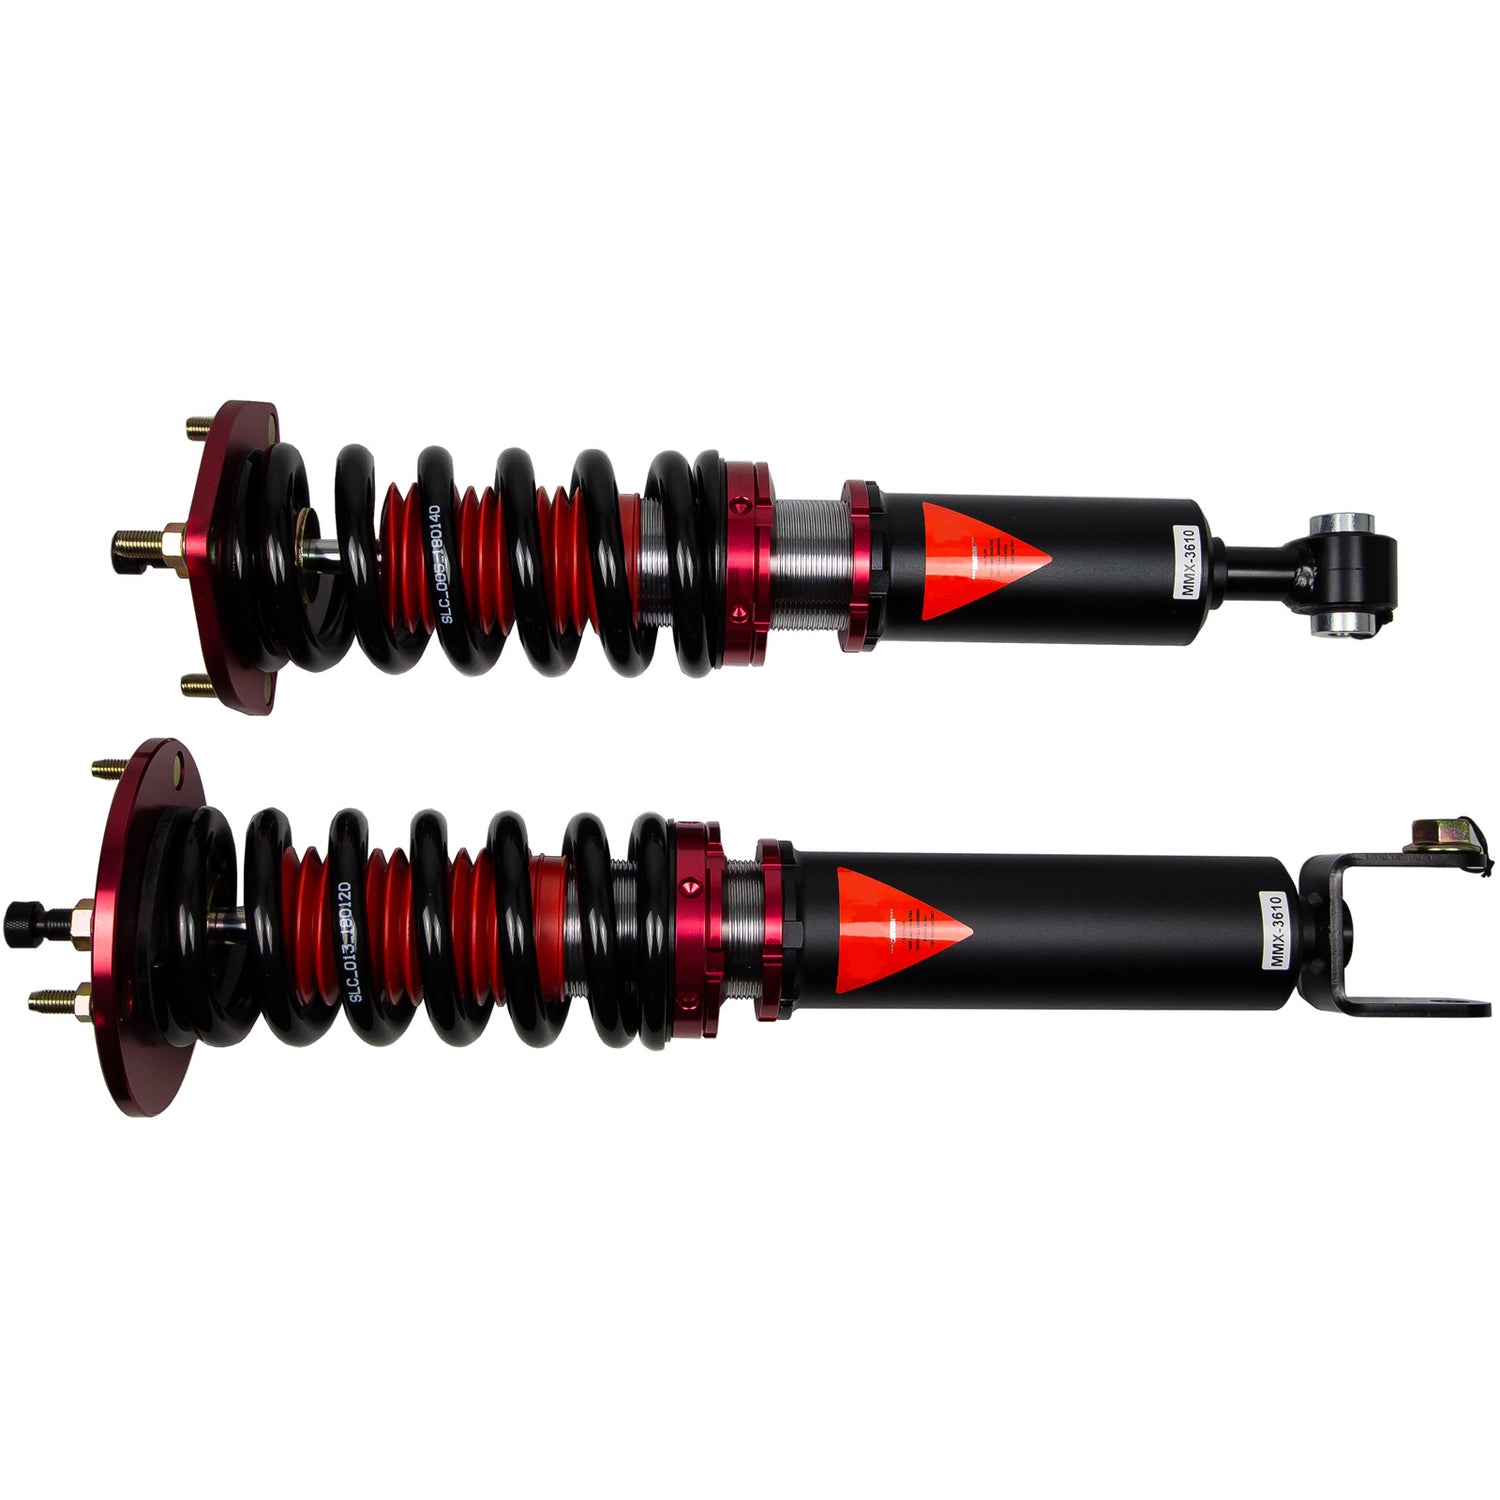 MMX3610 MAXX Coilovers Lowering Kit, Fully Adjustable, Ride Height, 40 Clicks Rebound Settings, Lexus GS300(JZS147) 91-97